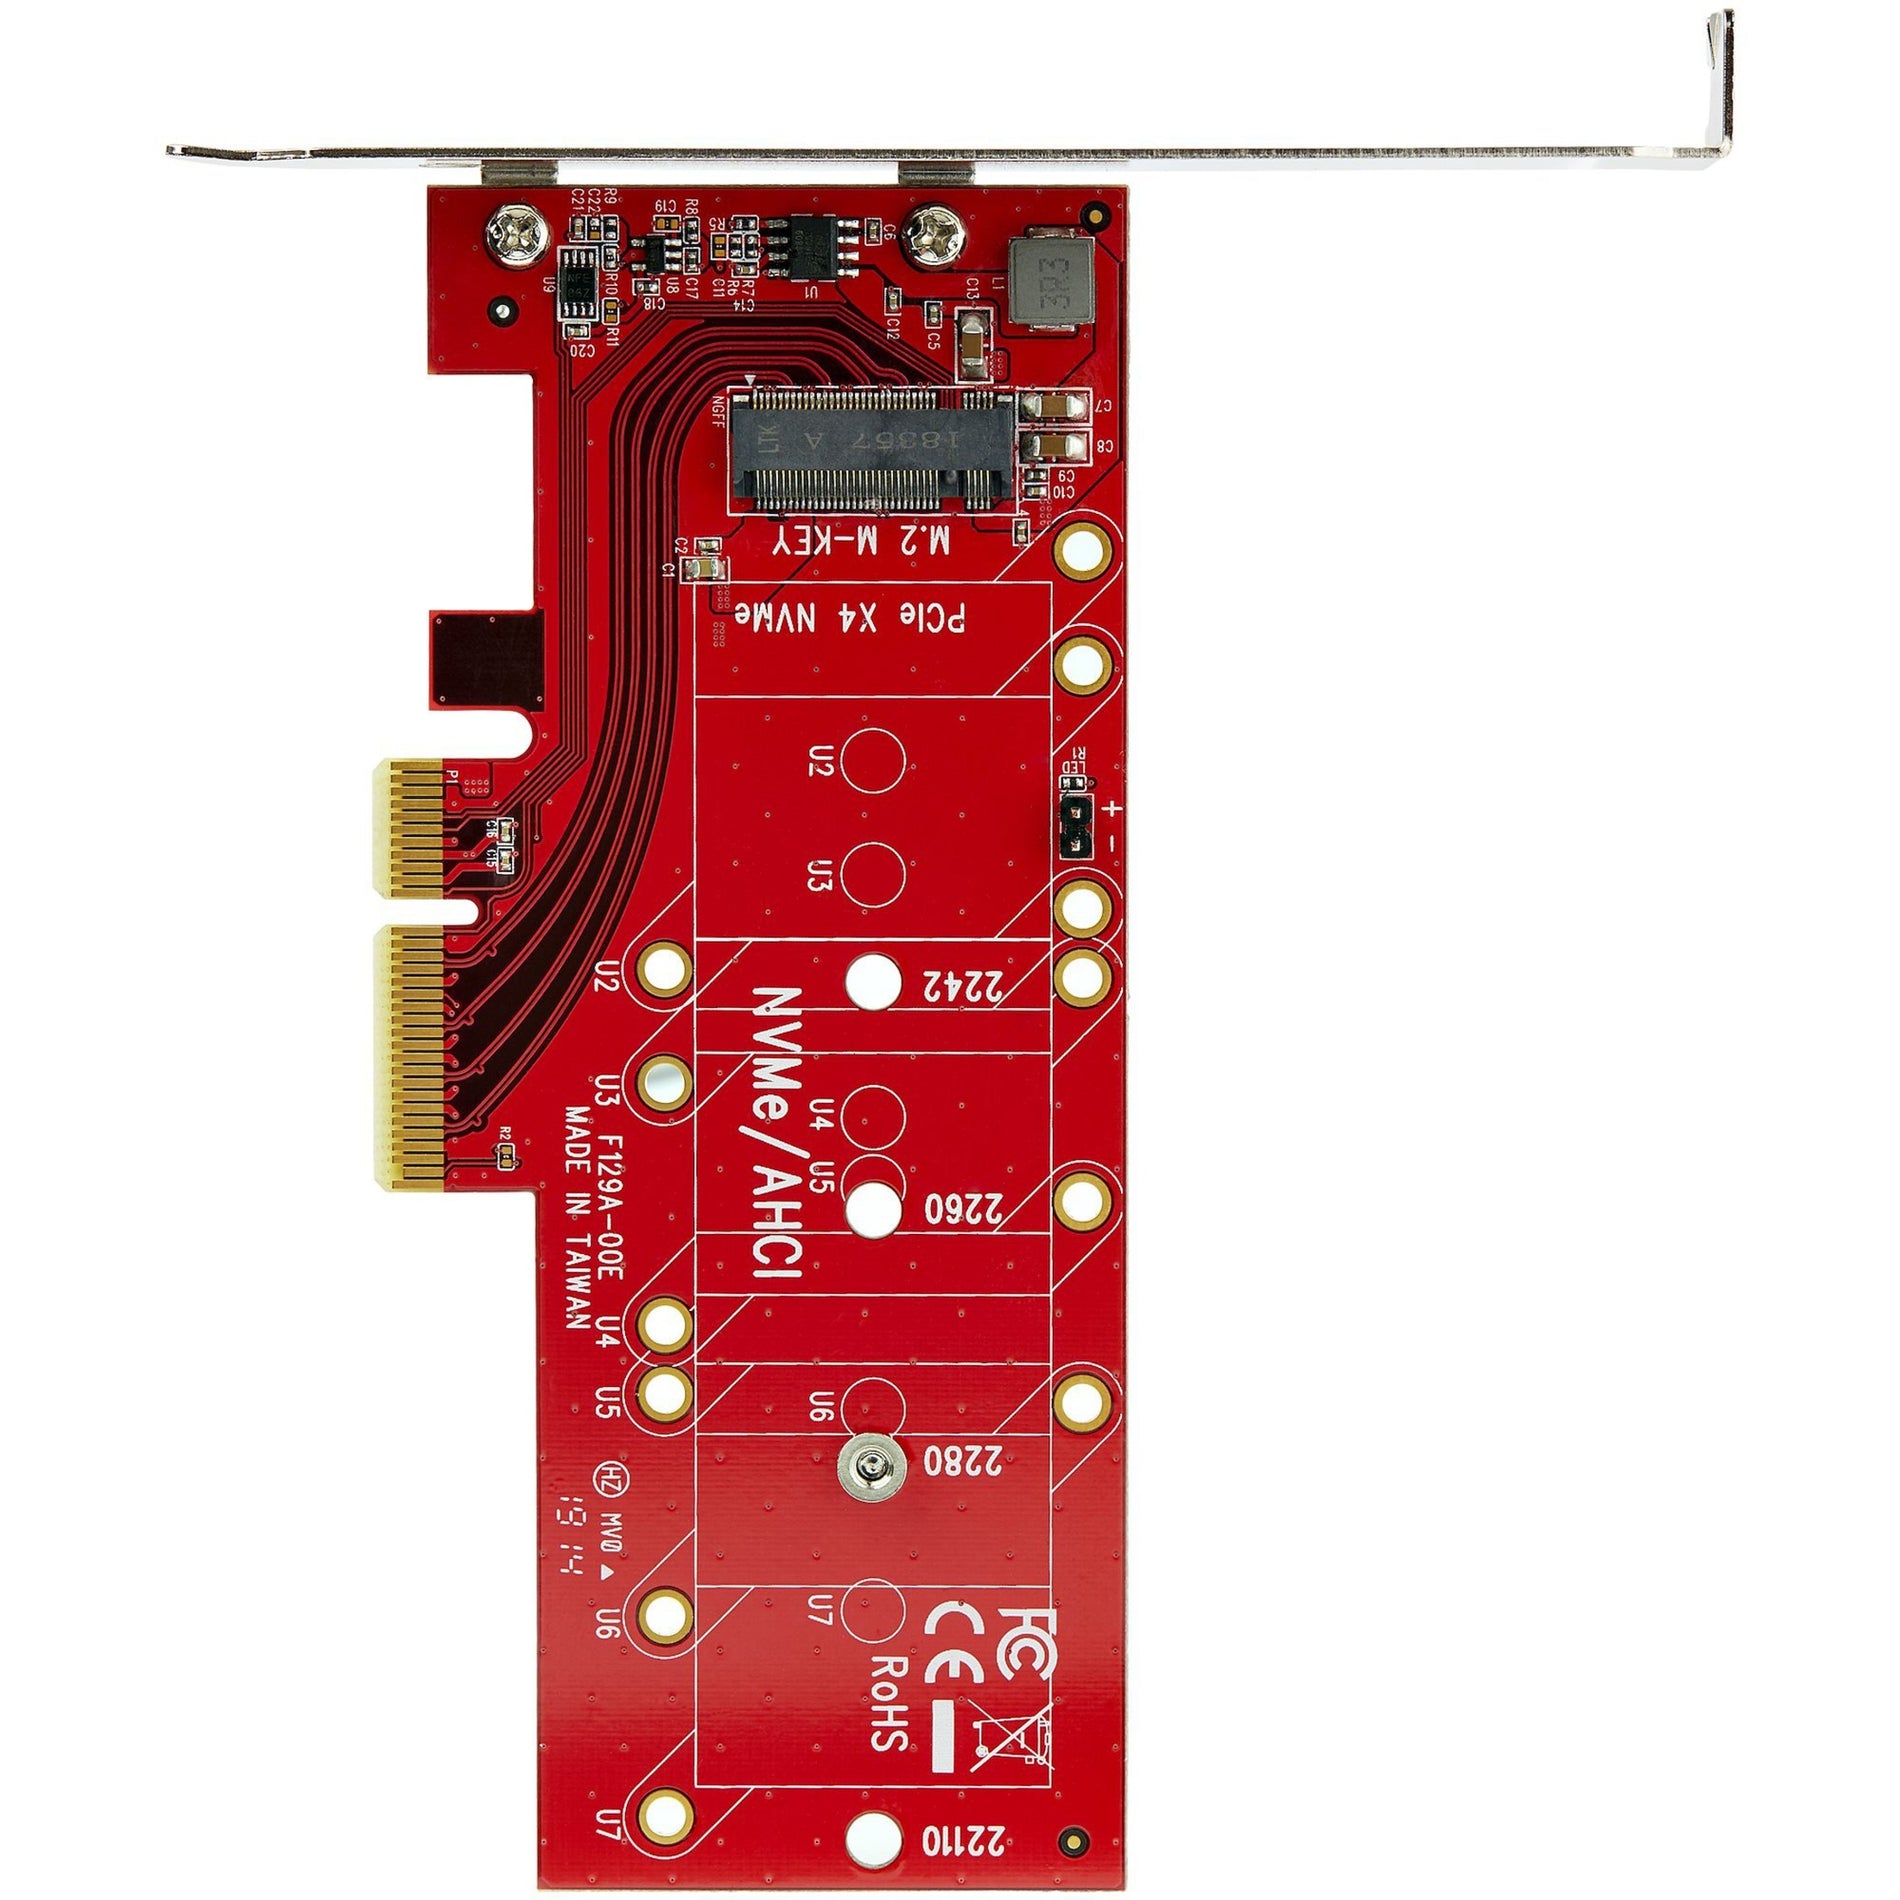 StarTech.com PEX4M2E1 x4 PCI Express to M.2 PCIe SSD Adapter - M.2 NVMe or ACHI Adapter Card, Easy SSD Installation